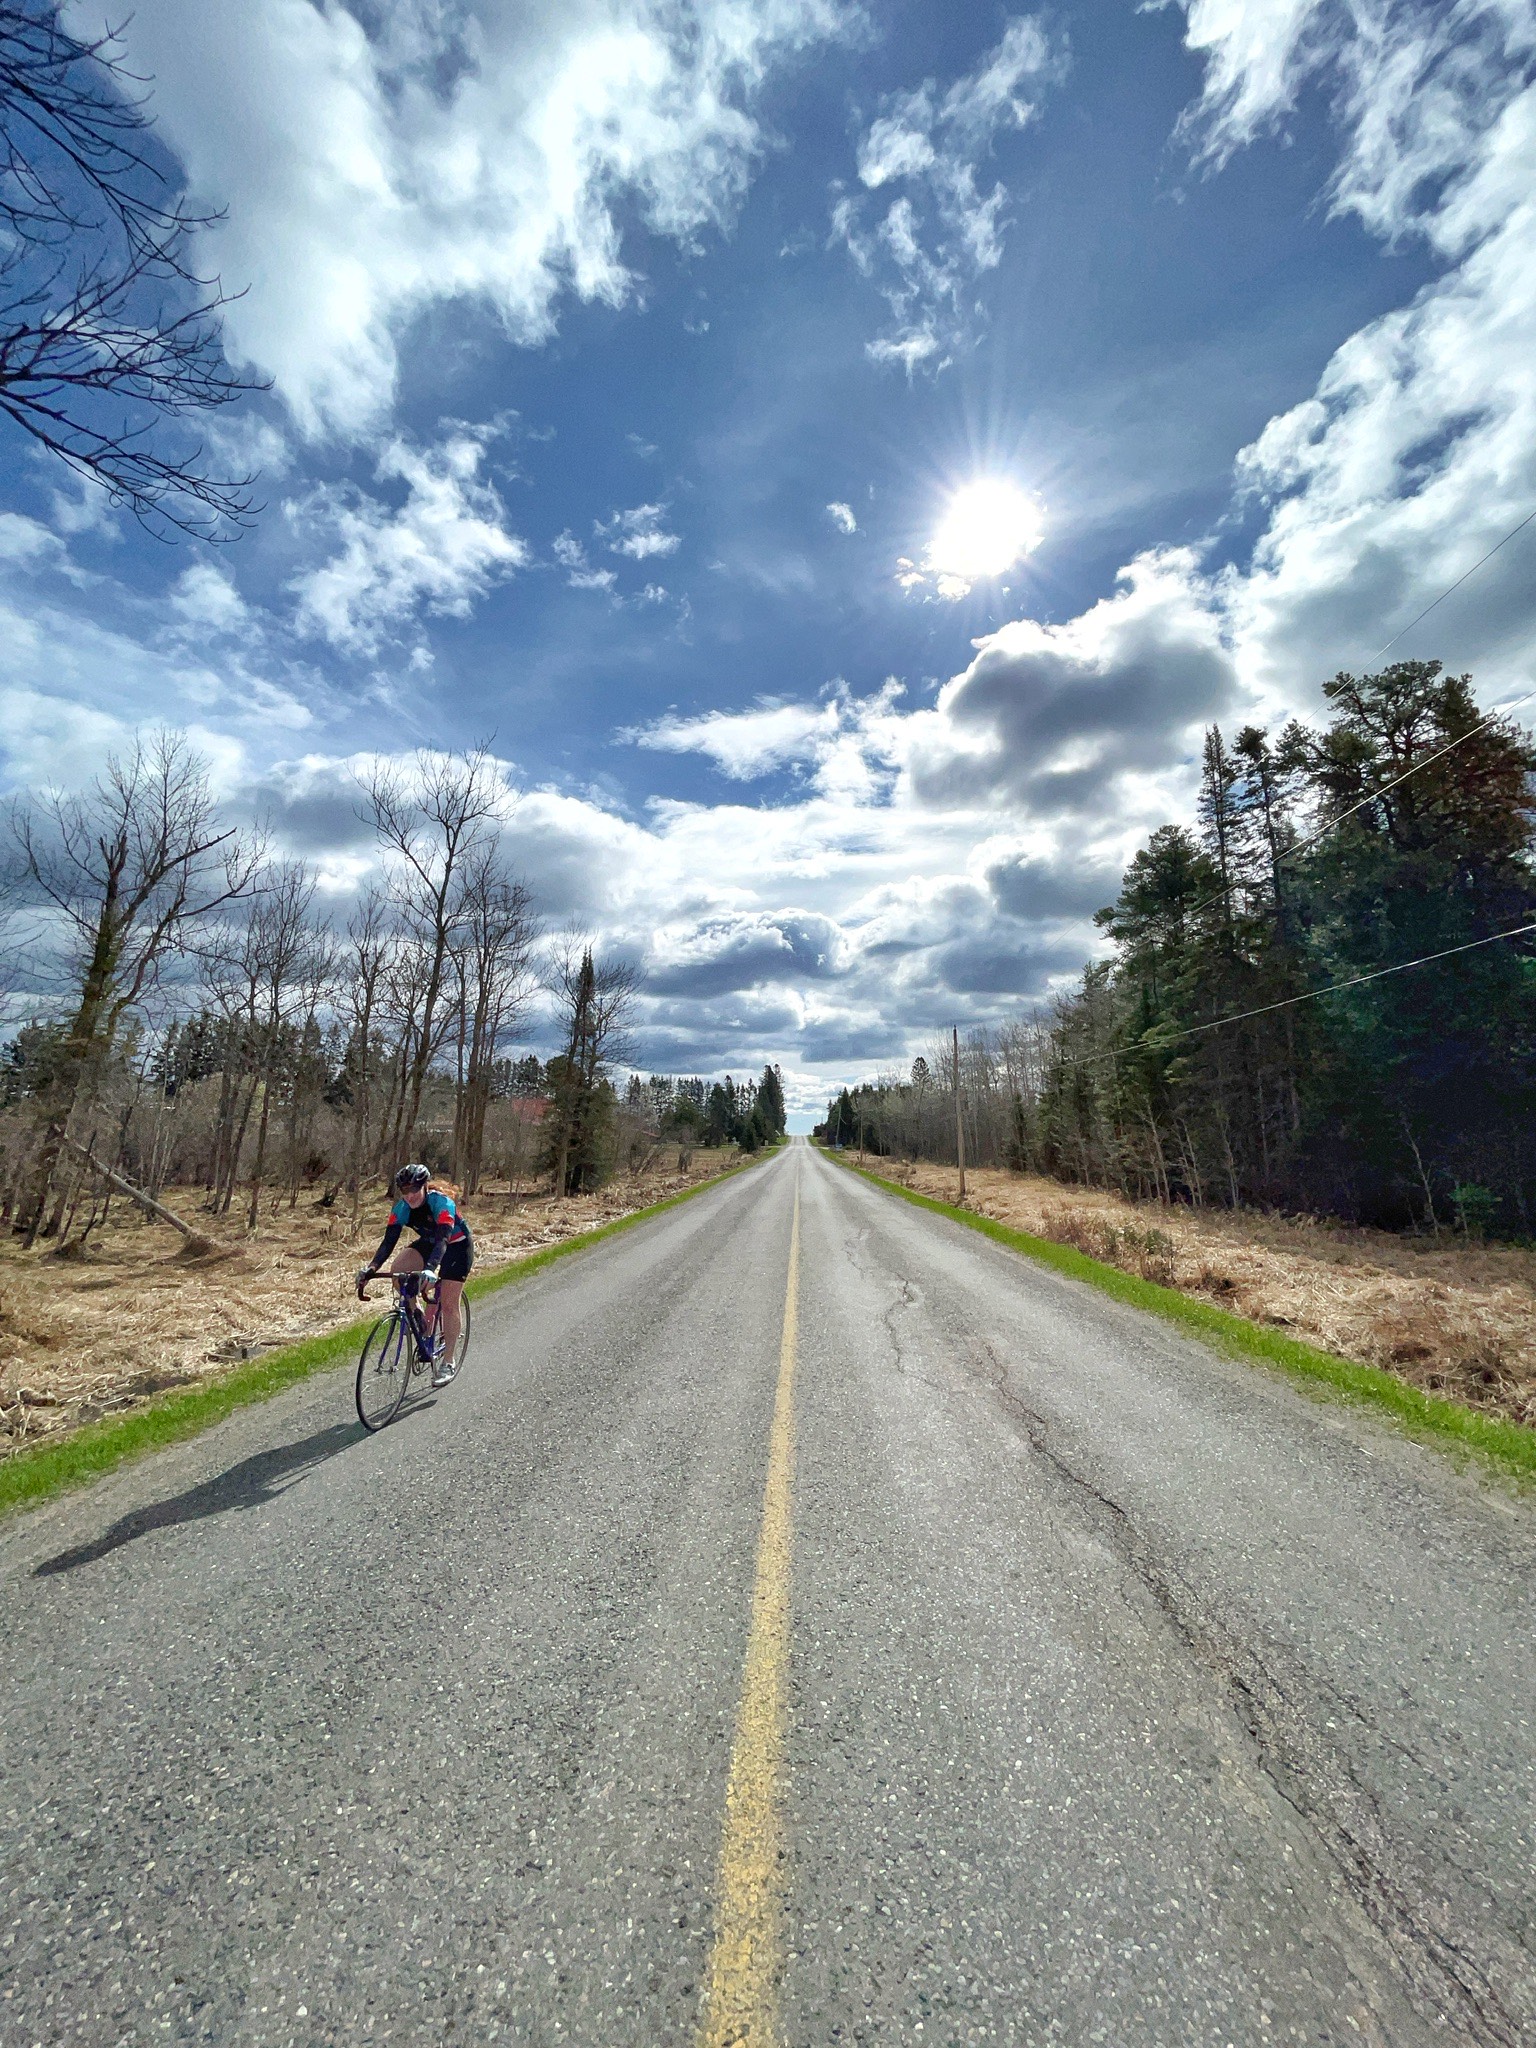 person rides a bicycle down a rural road on a sunny spring day